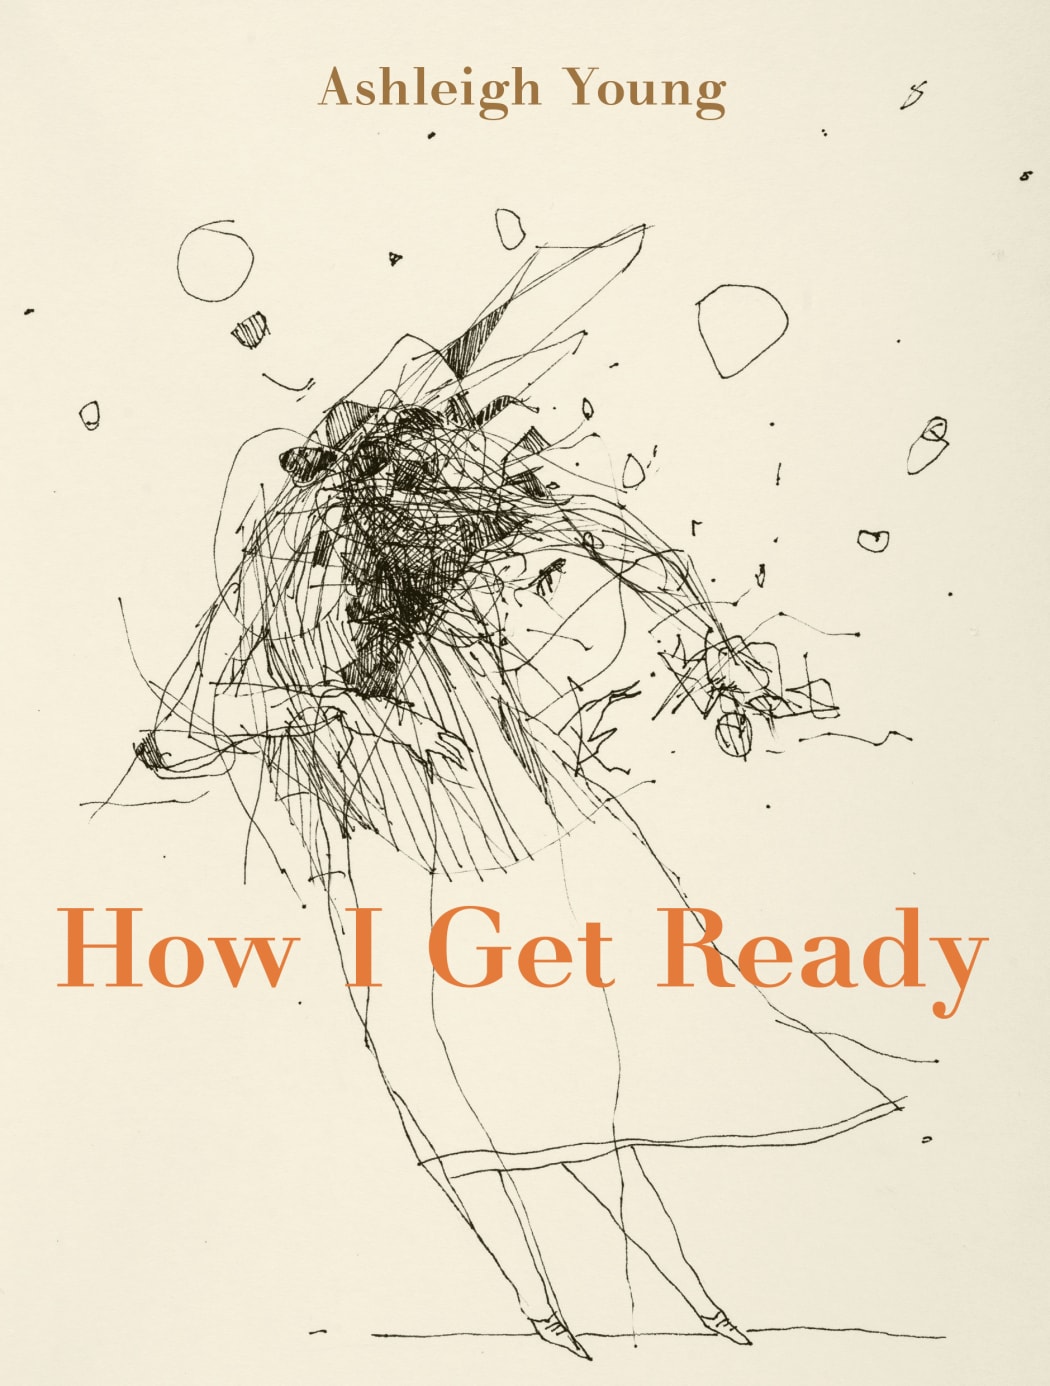 Ashleigh Young's new collection of poetry "How I Get Ready."